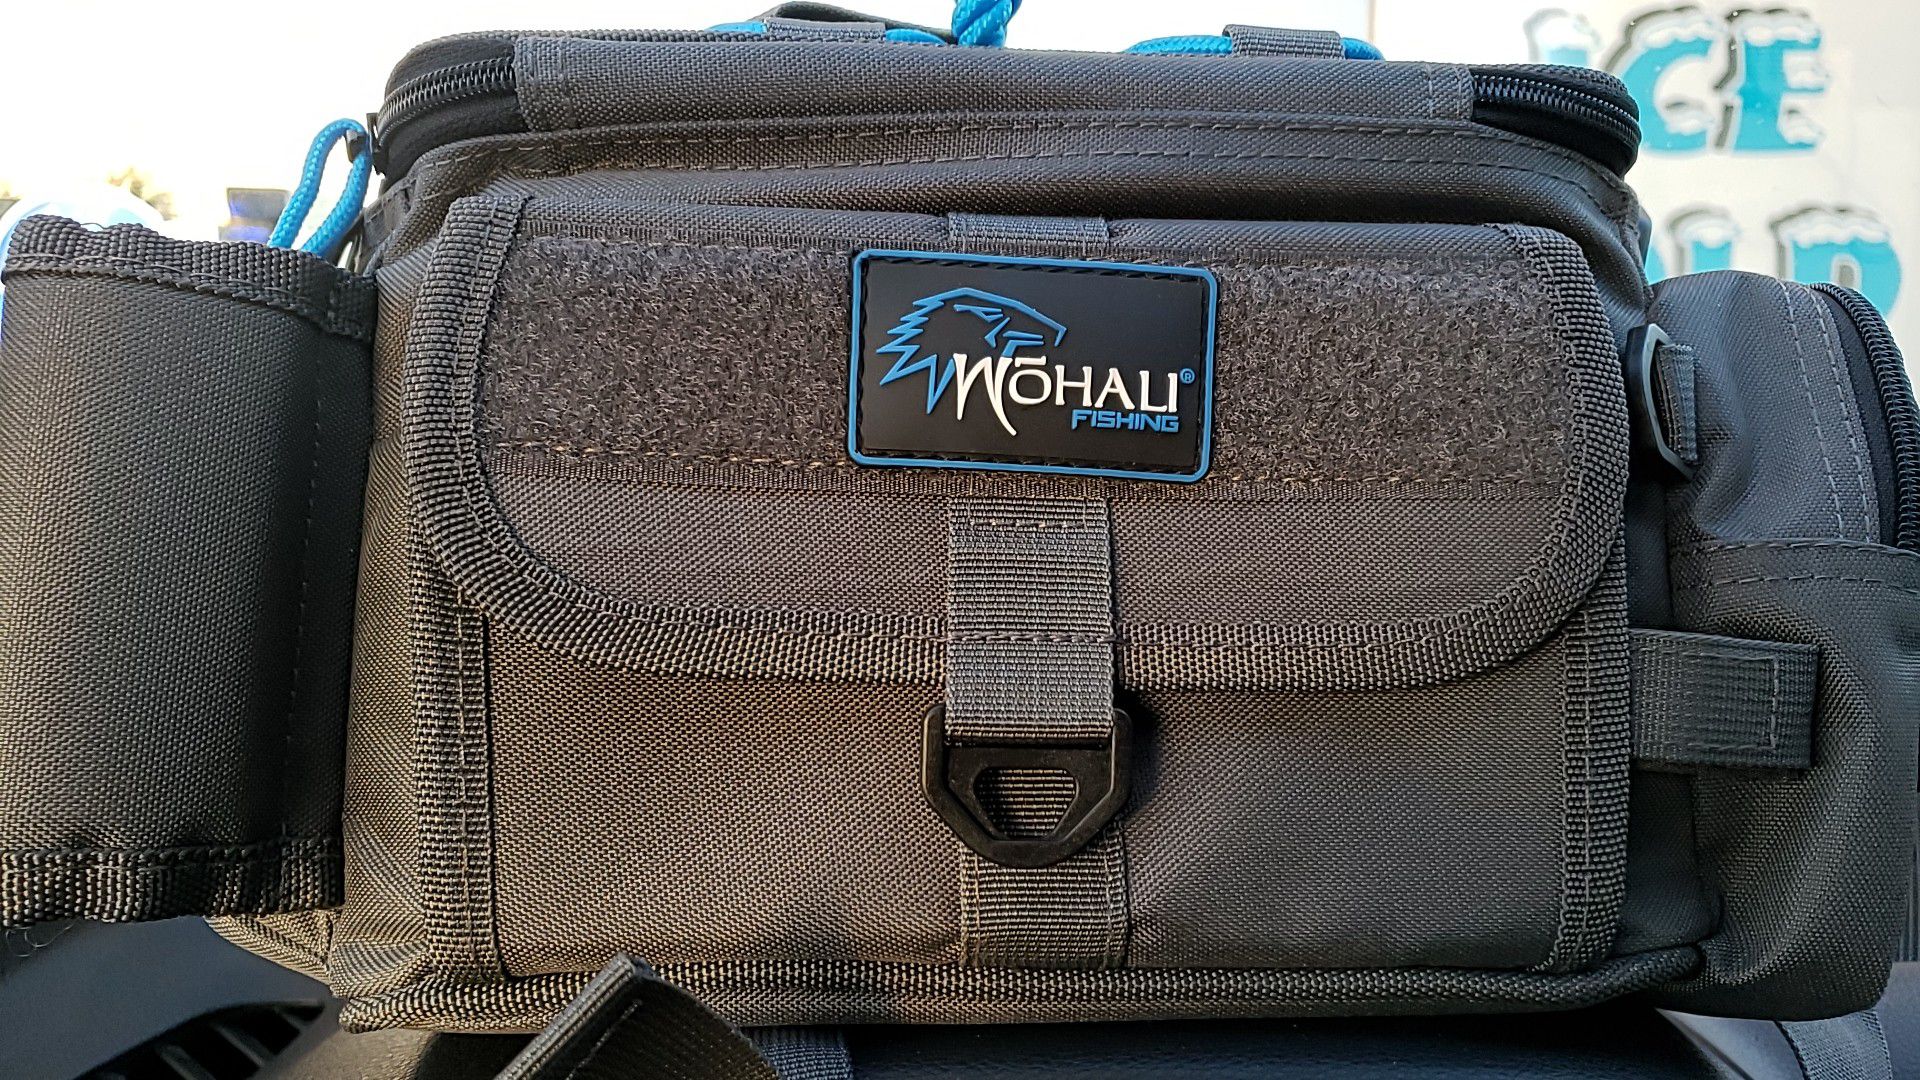 Wohali fishing gear bag with plastic bait and tackle boxes for Sale in Post  Falls, ID - OfferUp